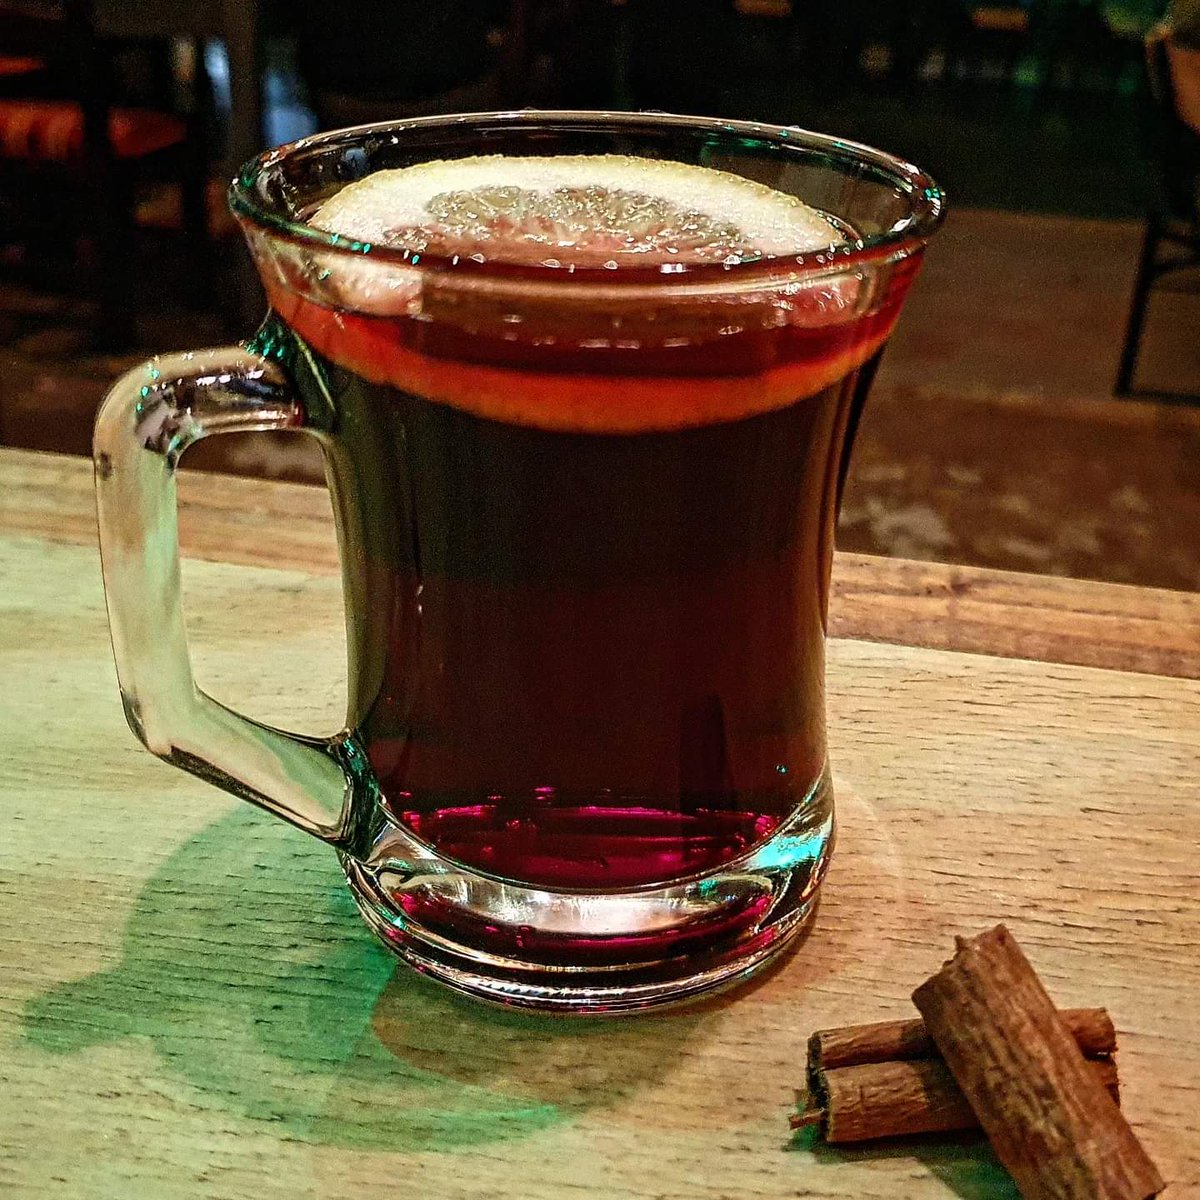 MULLED WINE - NOW ON 😃🎄🍷

It's hot, it's fruity, it's spicy and delicious! 

Also, coming soon, mulled cider 😮

Not forgetting all the wonderful beer we have on our taps, plus in bottles and cans! 🍻 

#mulledwine #beerintheforest #gluwein🍷